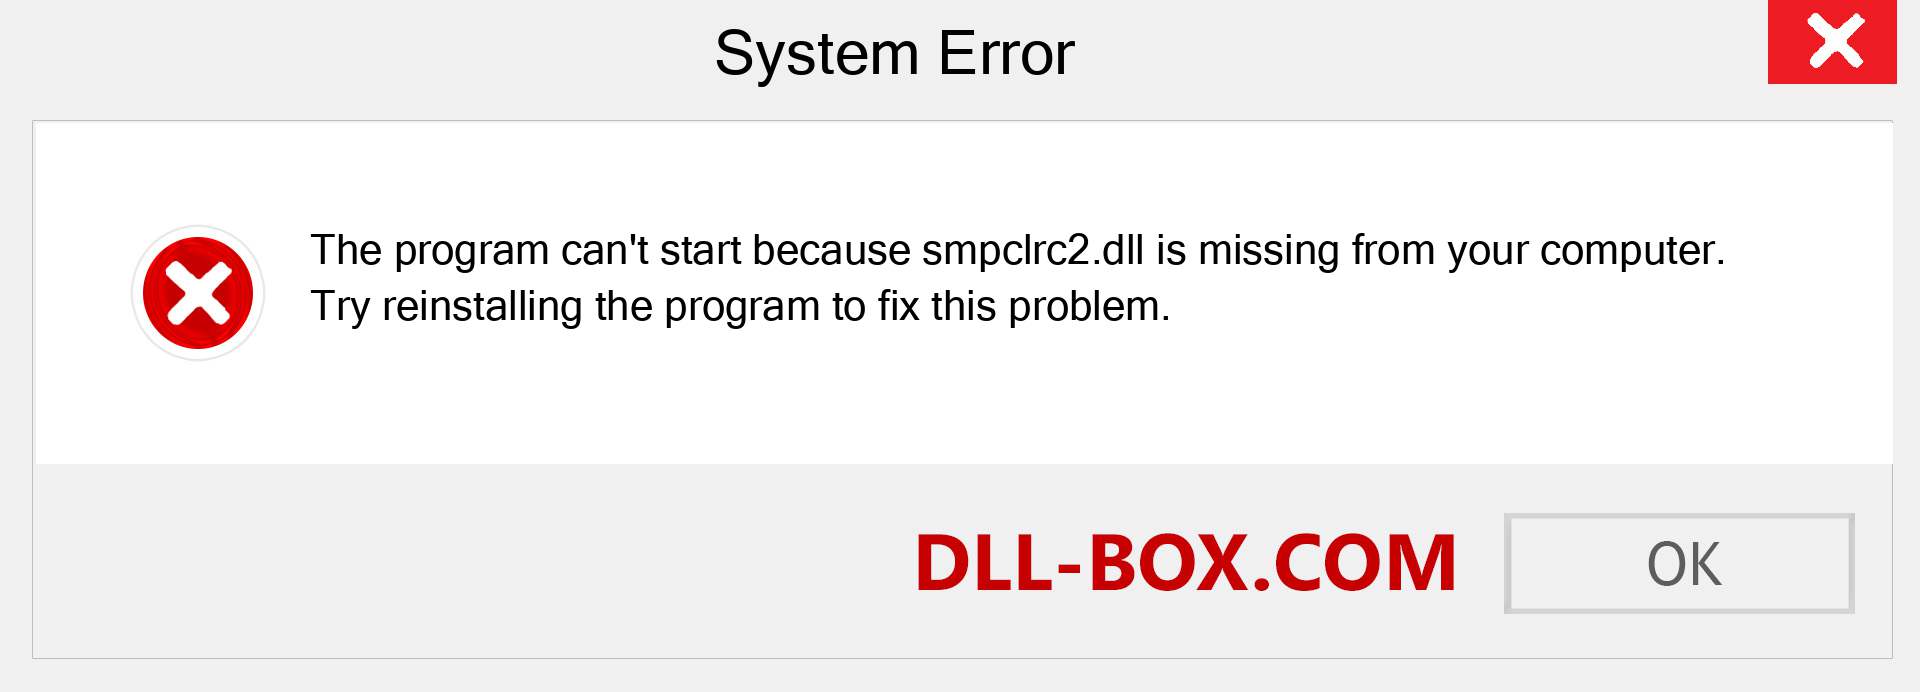  smpclrc2.dll file is missing?. Download for Windows 7, 8, 10 - Fix  smpclrc2 dll Missing Error on Windows, photos, images